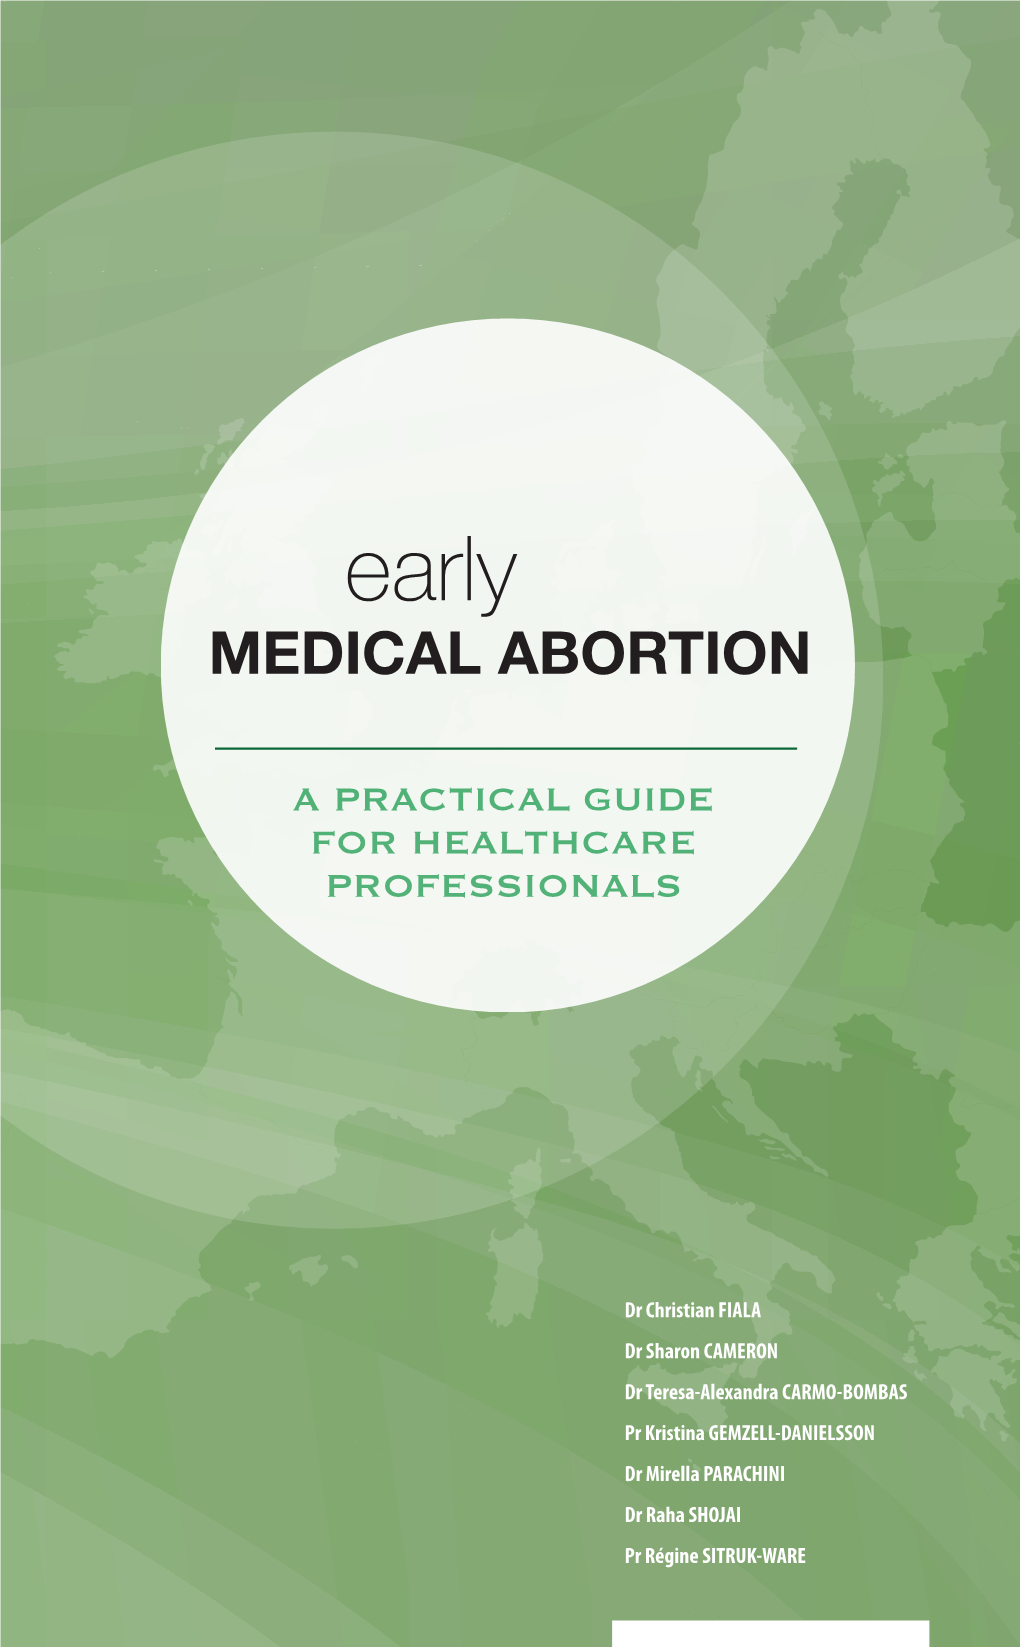 Early MEDICAL ABORTION